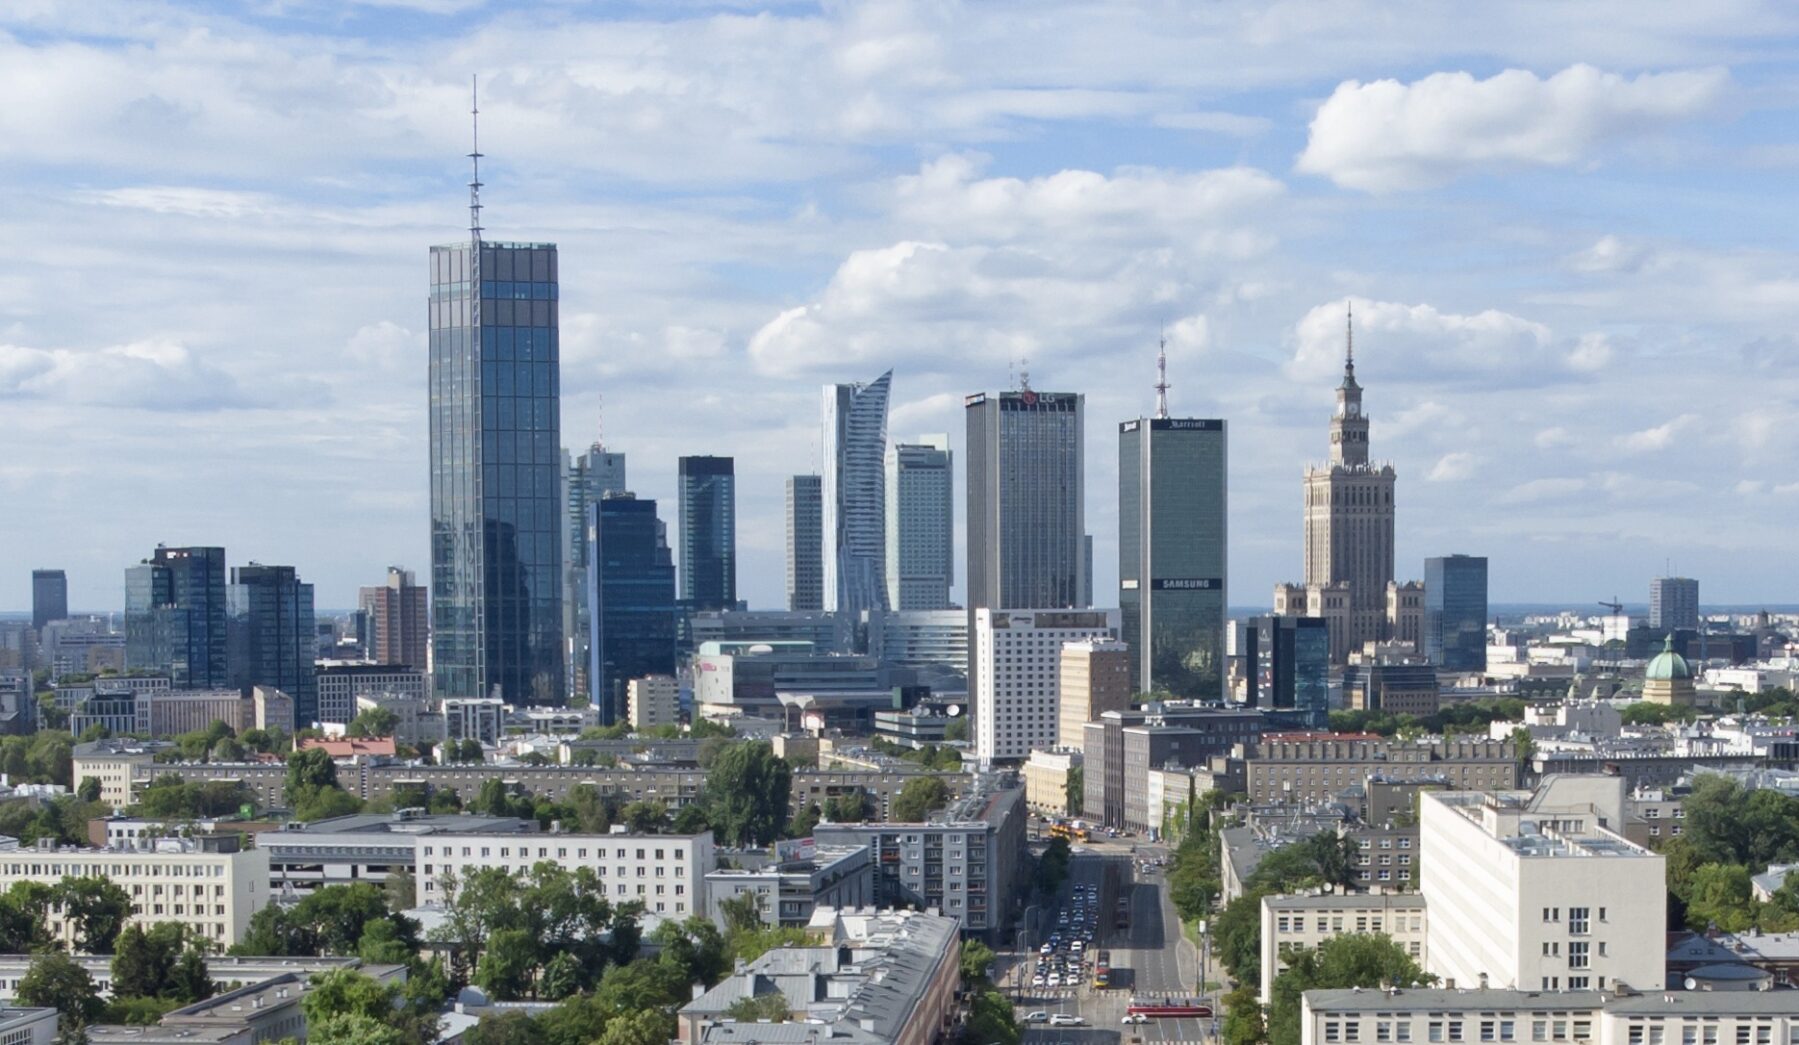 The skyline of Warsaw in 2022 (Photo: Emptywords (CC)